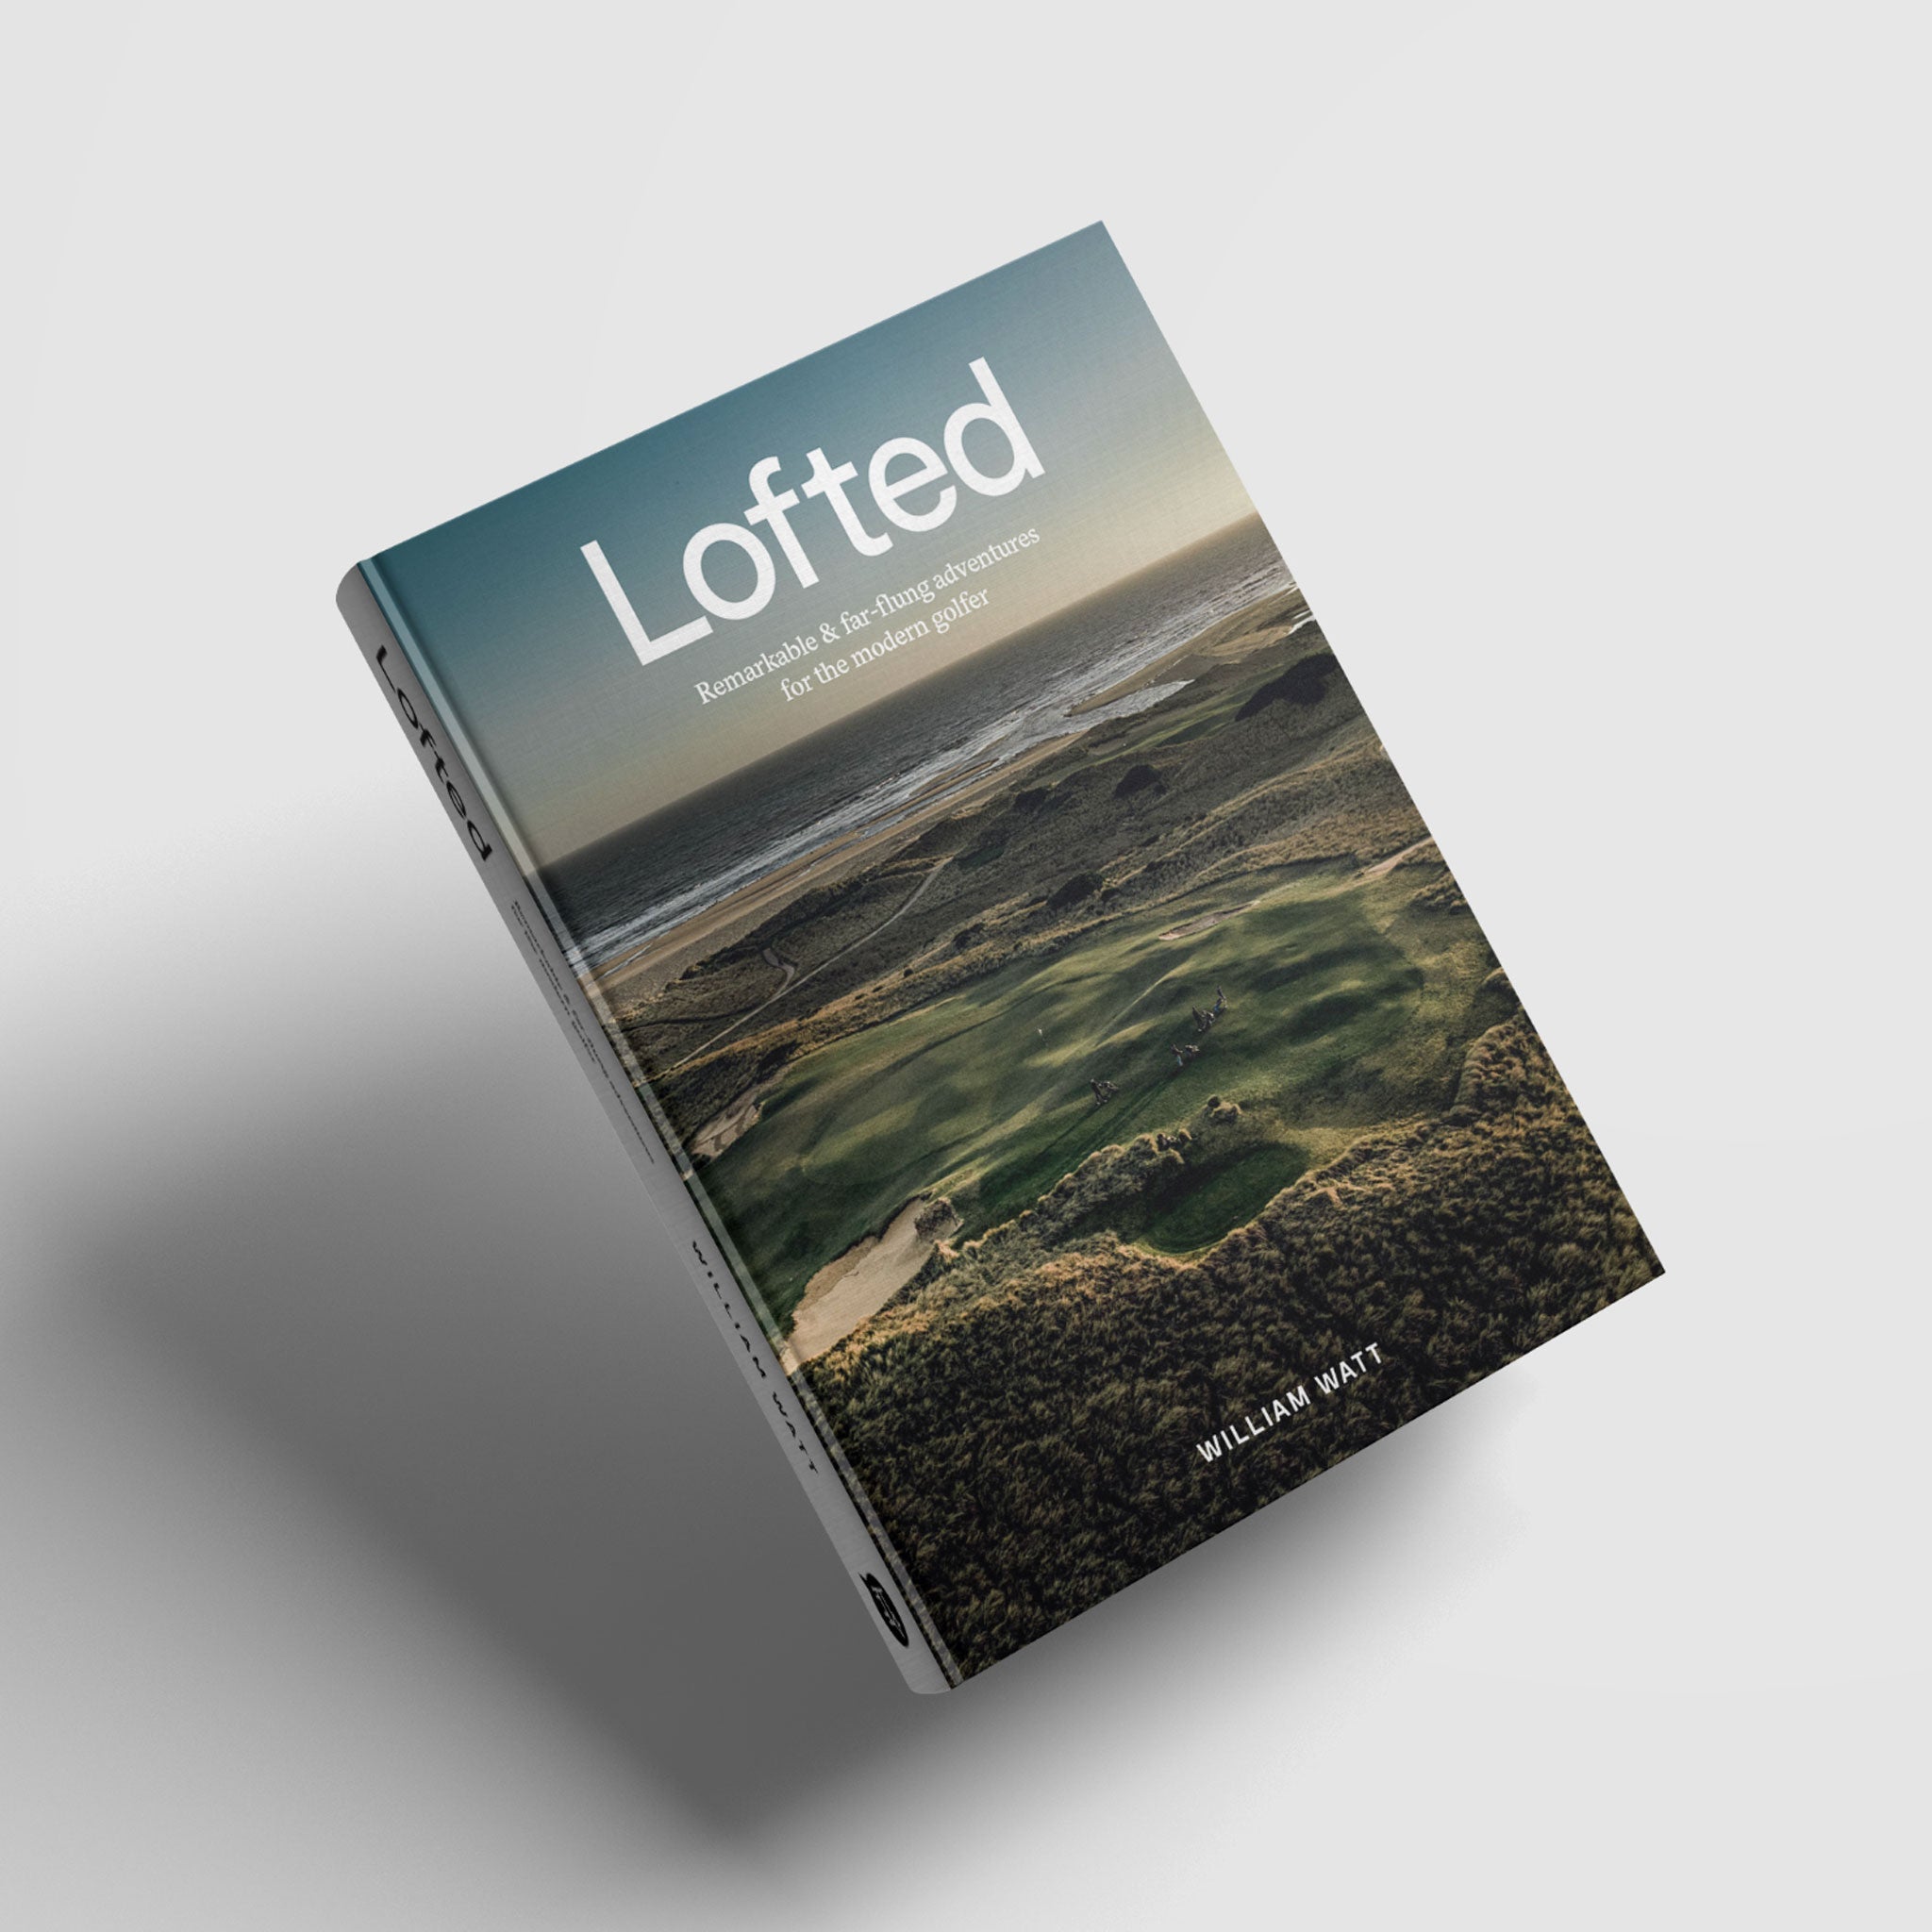 Lofted: Remarkable and Far-flung Adventures for the Modern Golfer